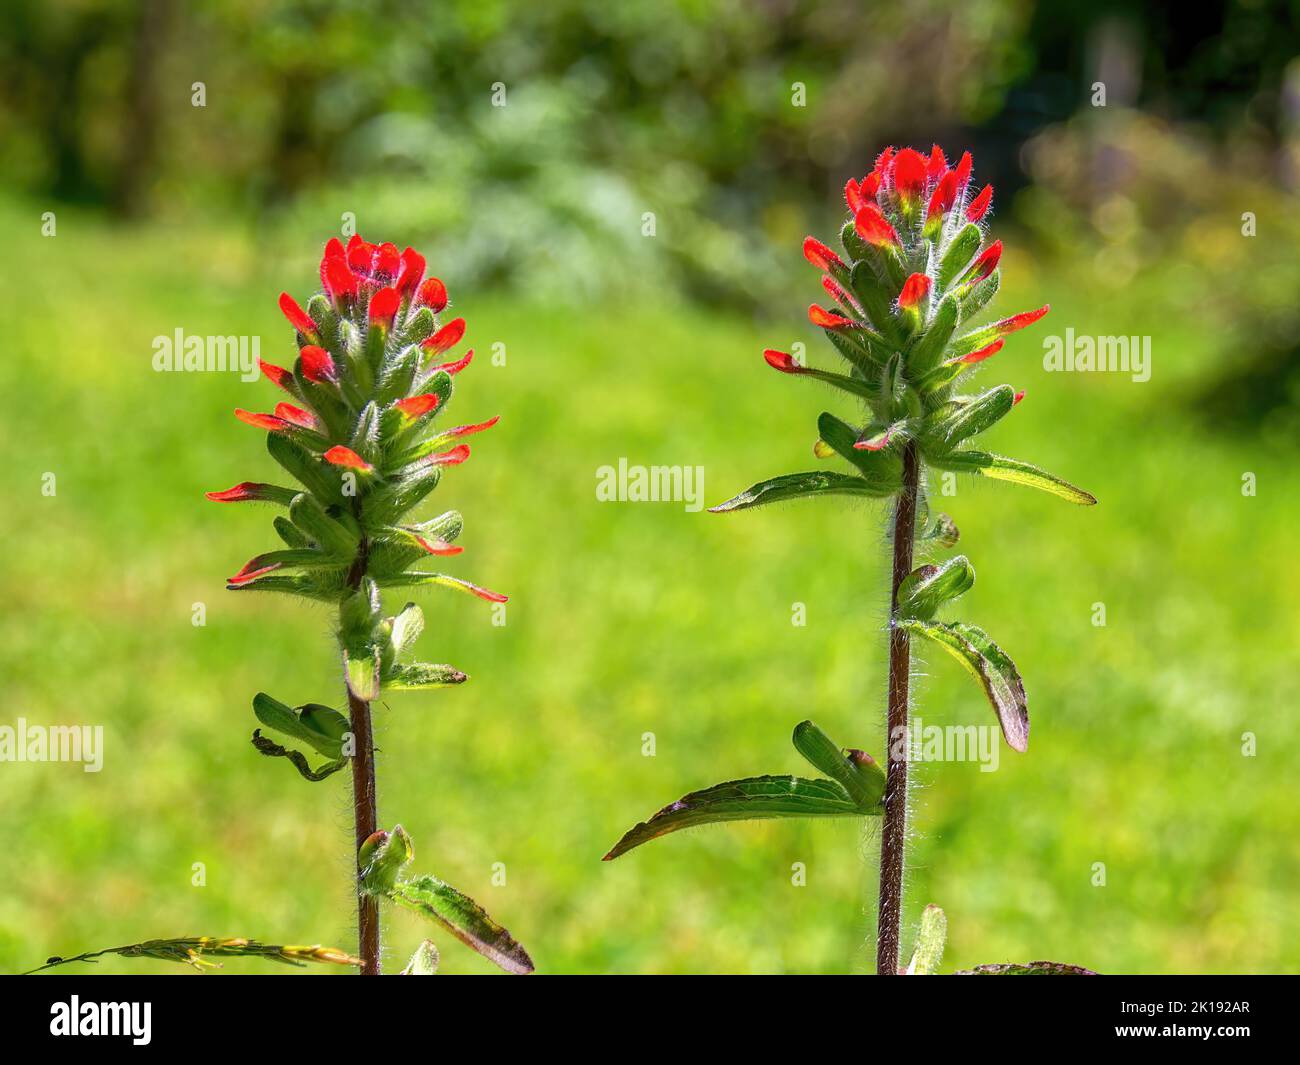 Close-up photography of two scarlet Indian paintbrush flowers captured in a field near the colonial town of Villa de Leyva in the Andean mountains of Stock Photo